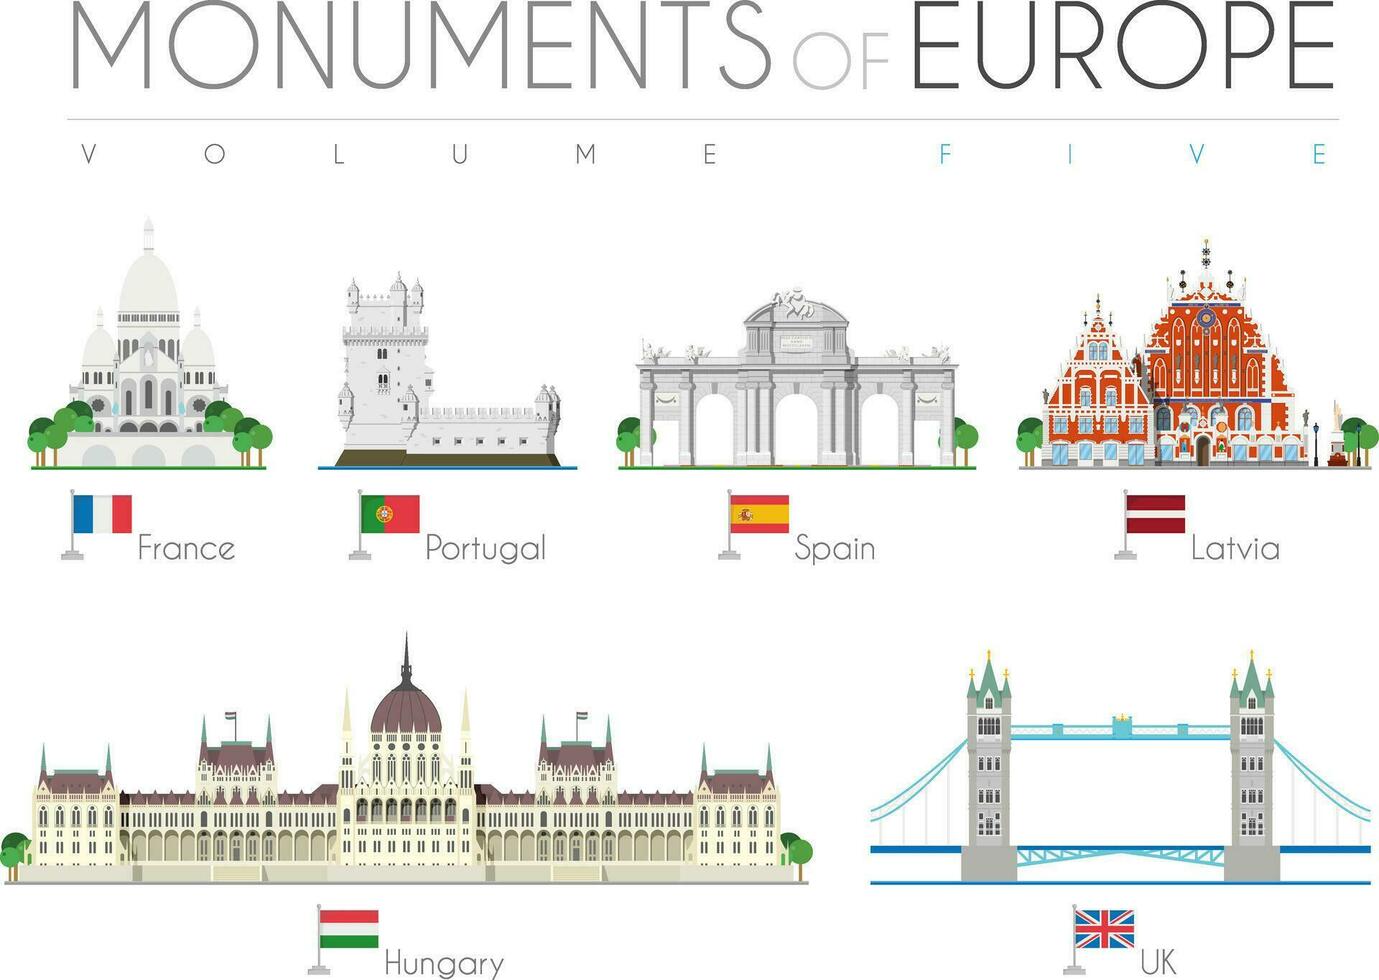 Monuments of Europe in cartoon style Vol 5. Sacre Coeur, Belem Tower -Portugal, Alcala Gate -Spain, Blackheads House -Latvia, Hungarian Parliament -Hungary, and Tower Bridge -UK. Vector illustration